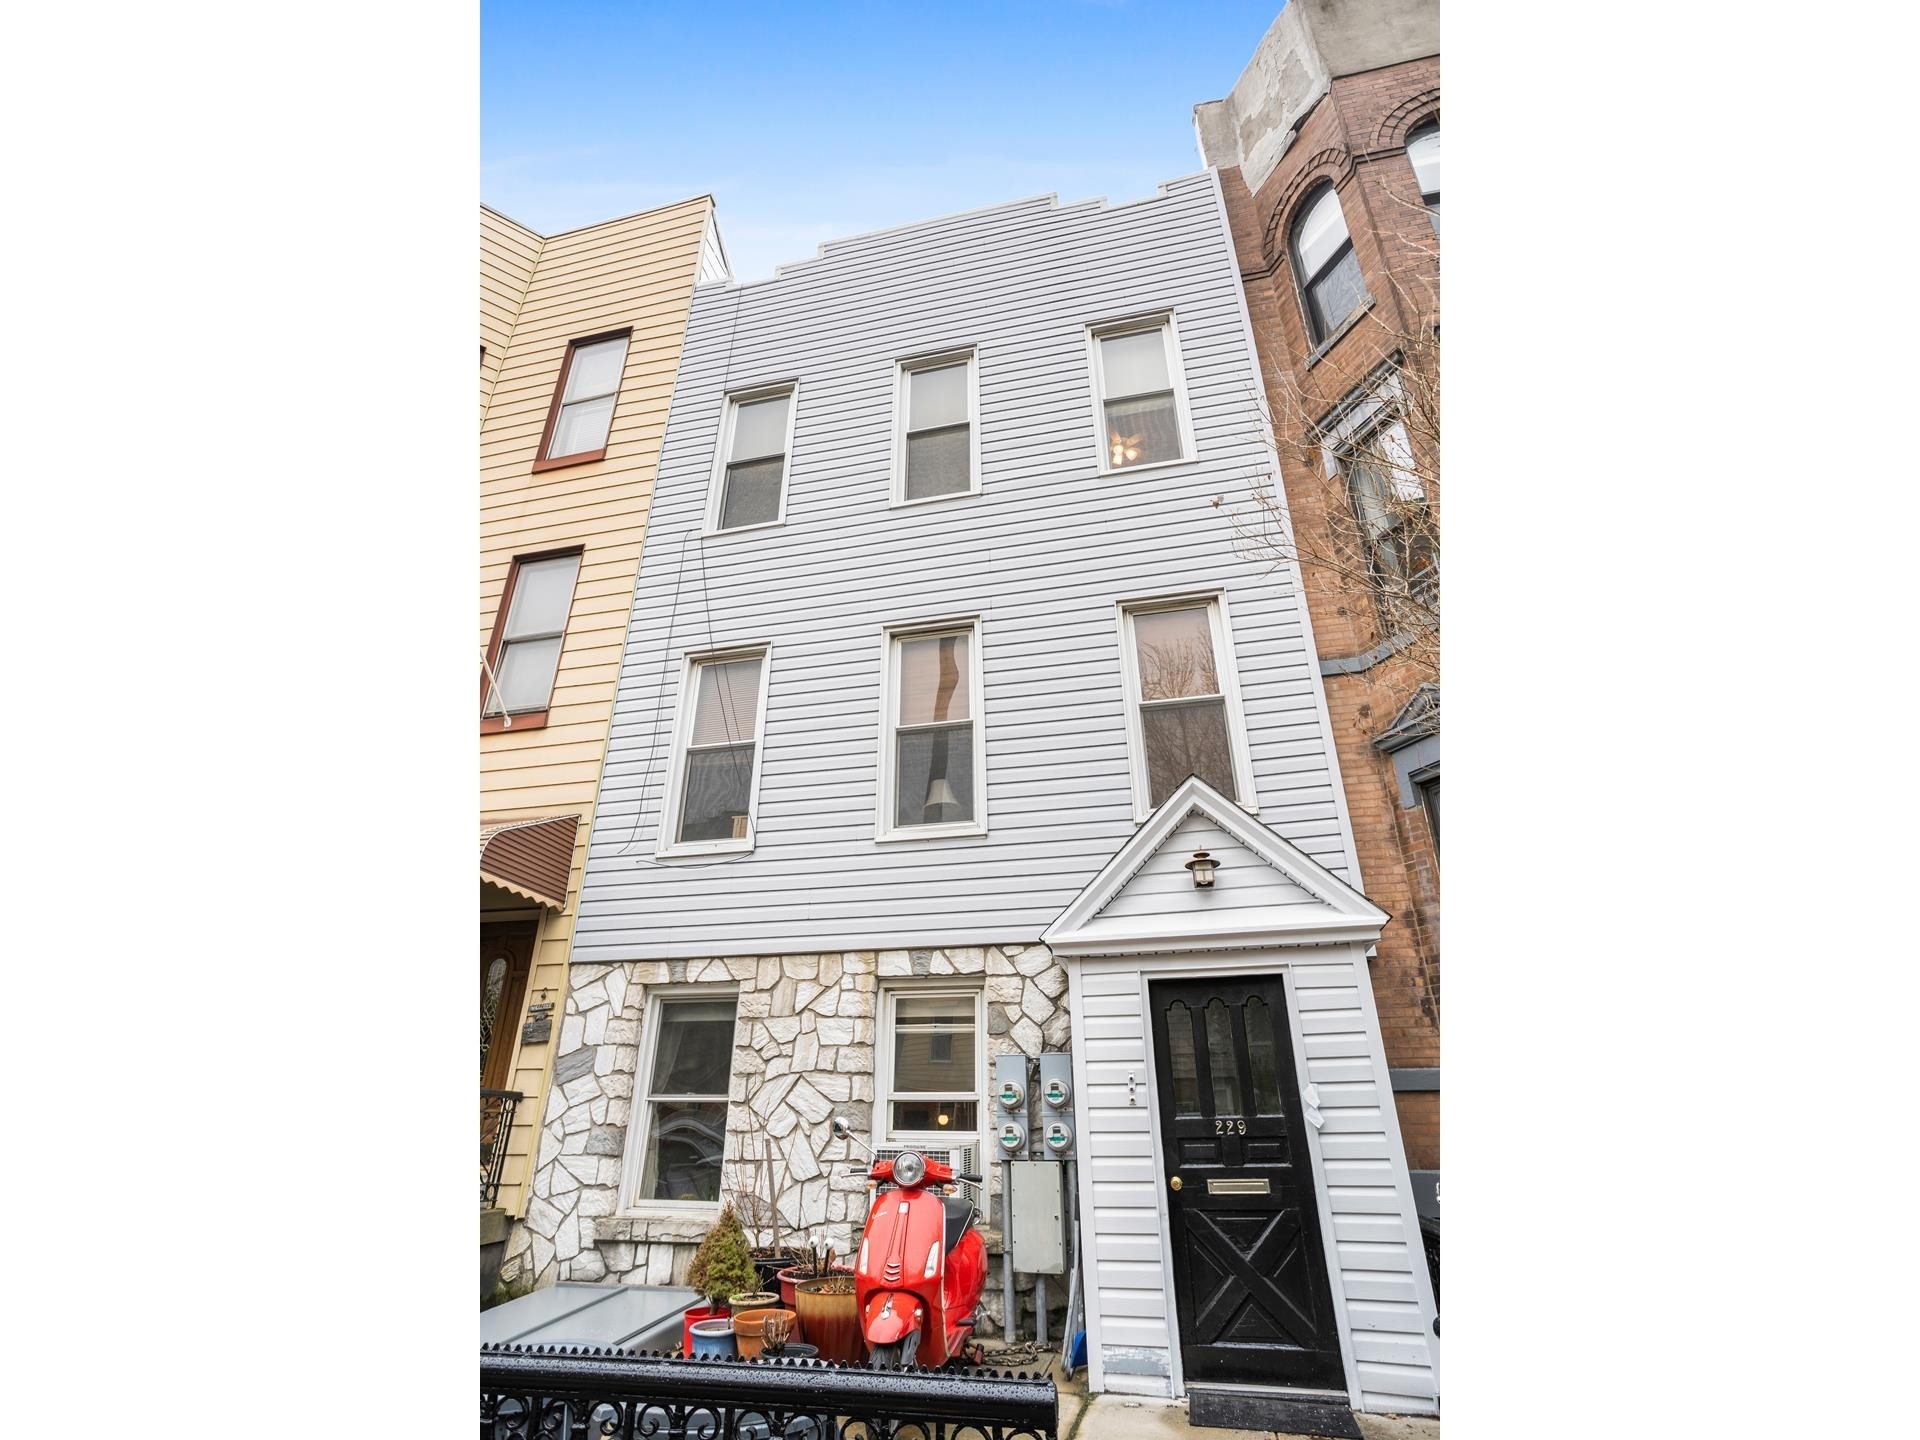 Multi Family Townhouse for Sale at 229 N HENRY ST, TOWNHOUSE Greenpoint, Brooklyn, New York 11222